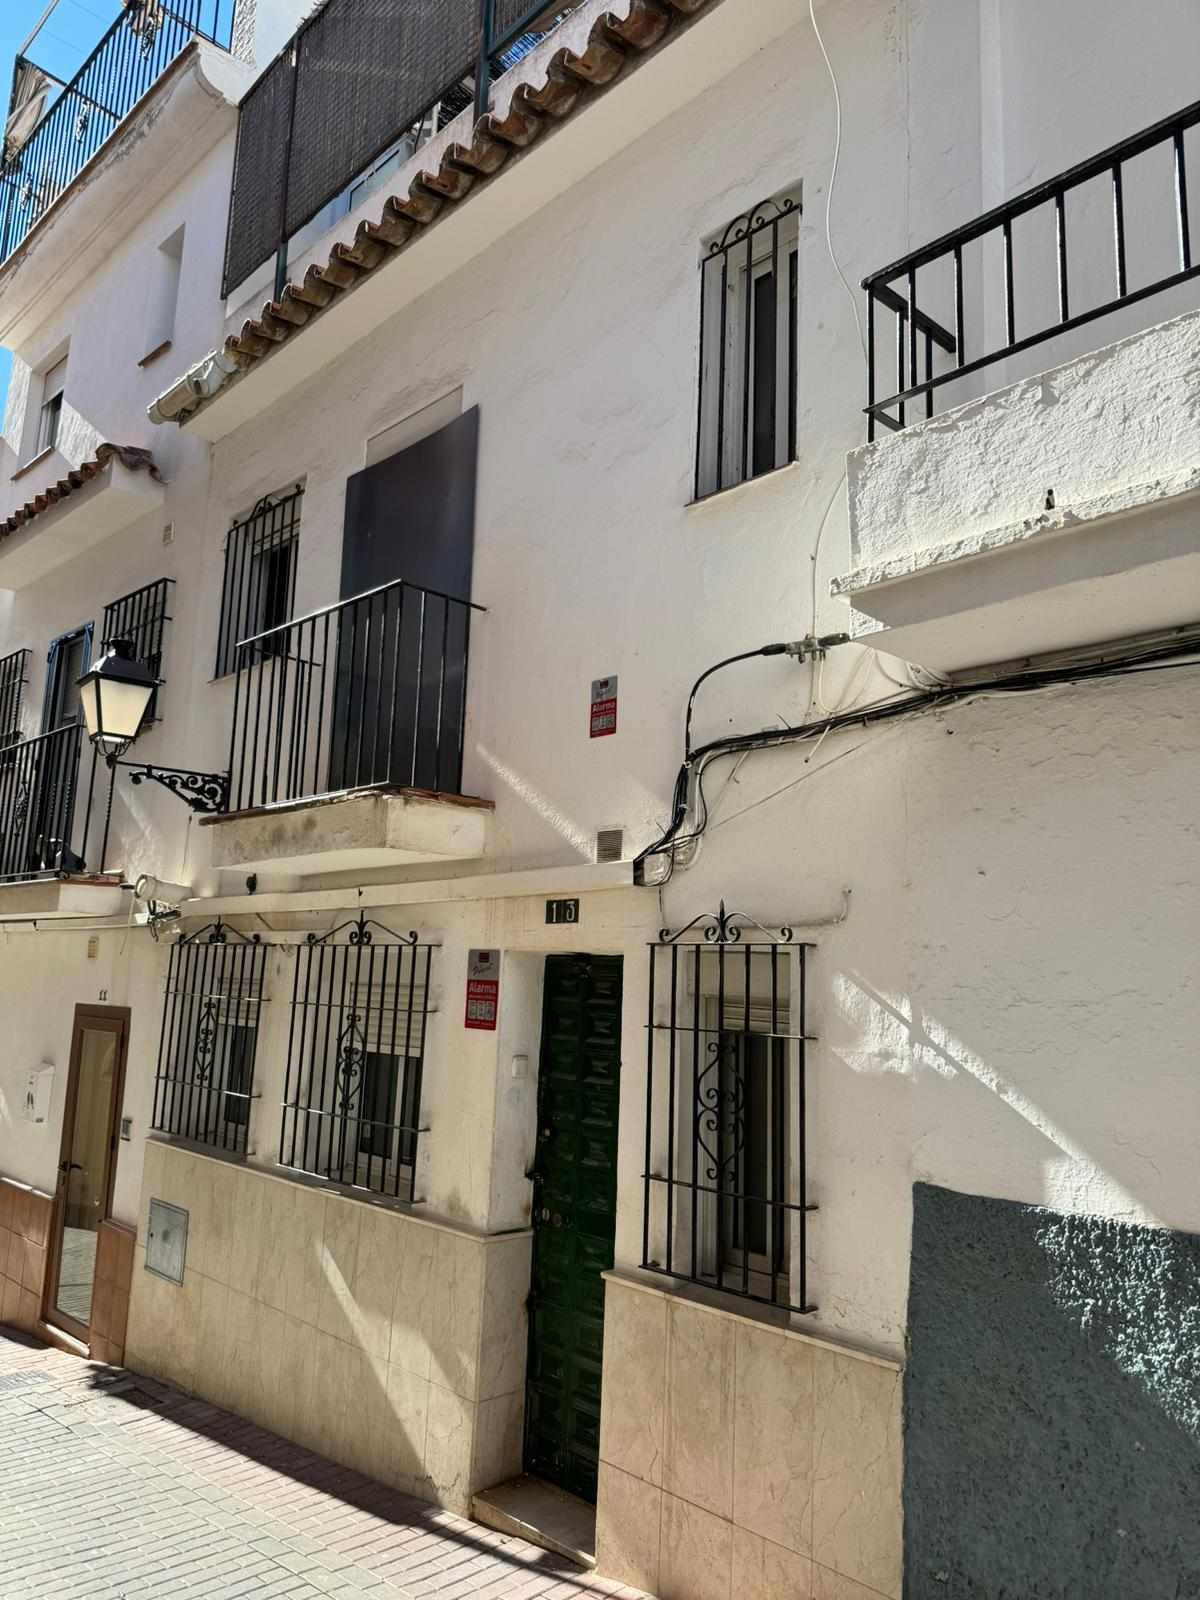 2 Bedroom Townhouse For Sale, Marbella